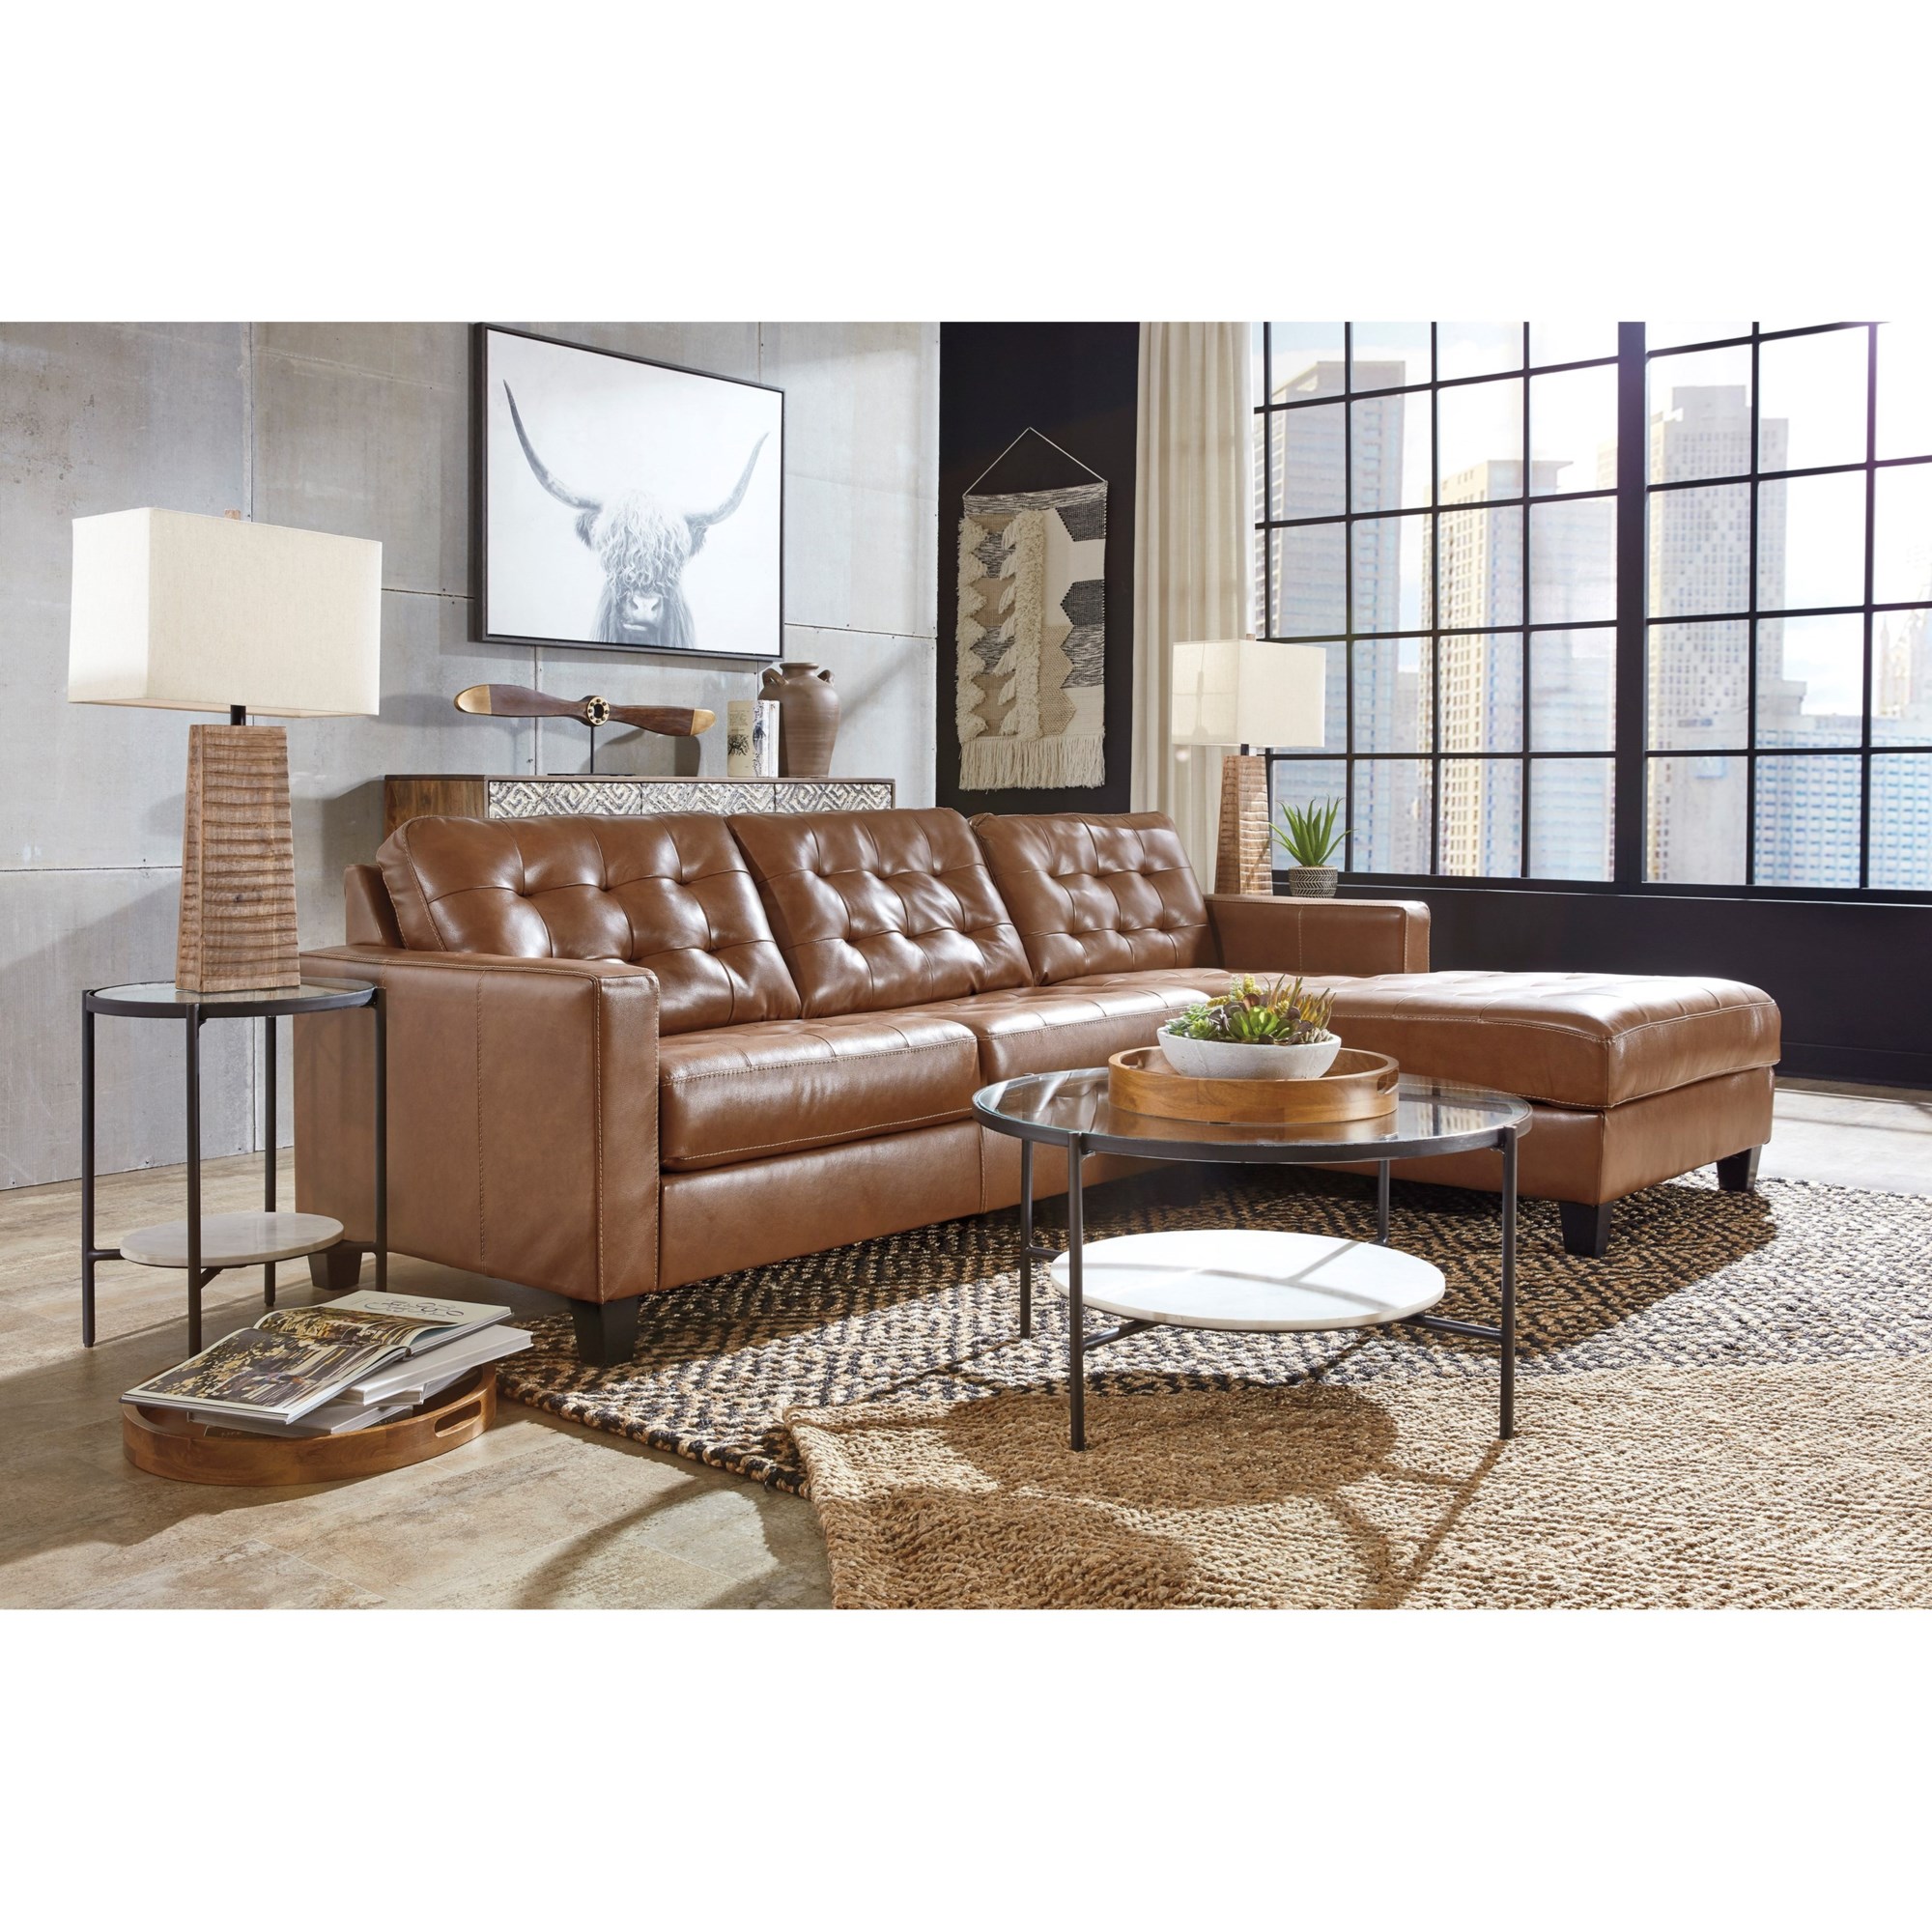 Signature Design by Ashley Baskove 11102S3 Leather Match 2-Piece Sectional  with Chaise and Tufting | Furniture and ApplianceMart | Sectional - Sofa  Groups